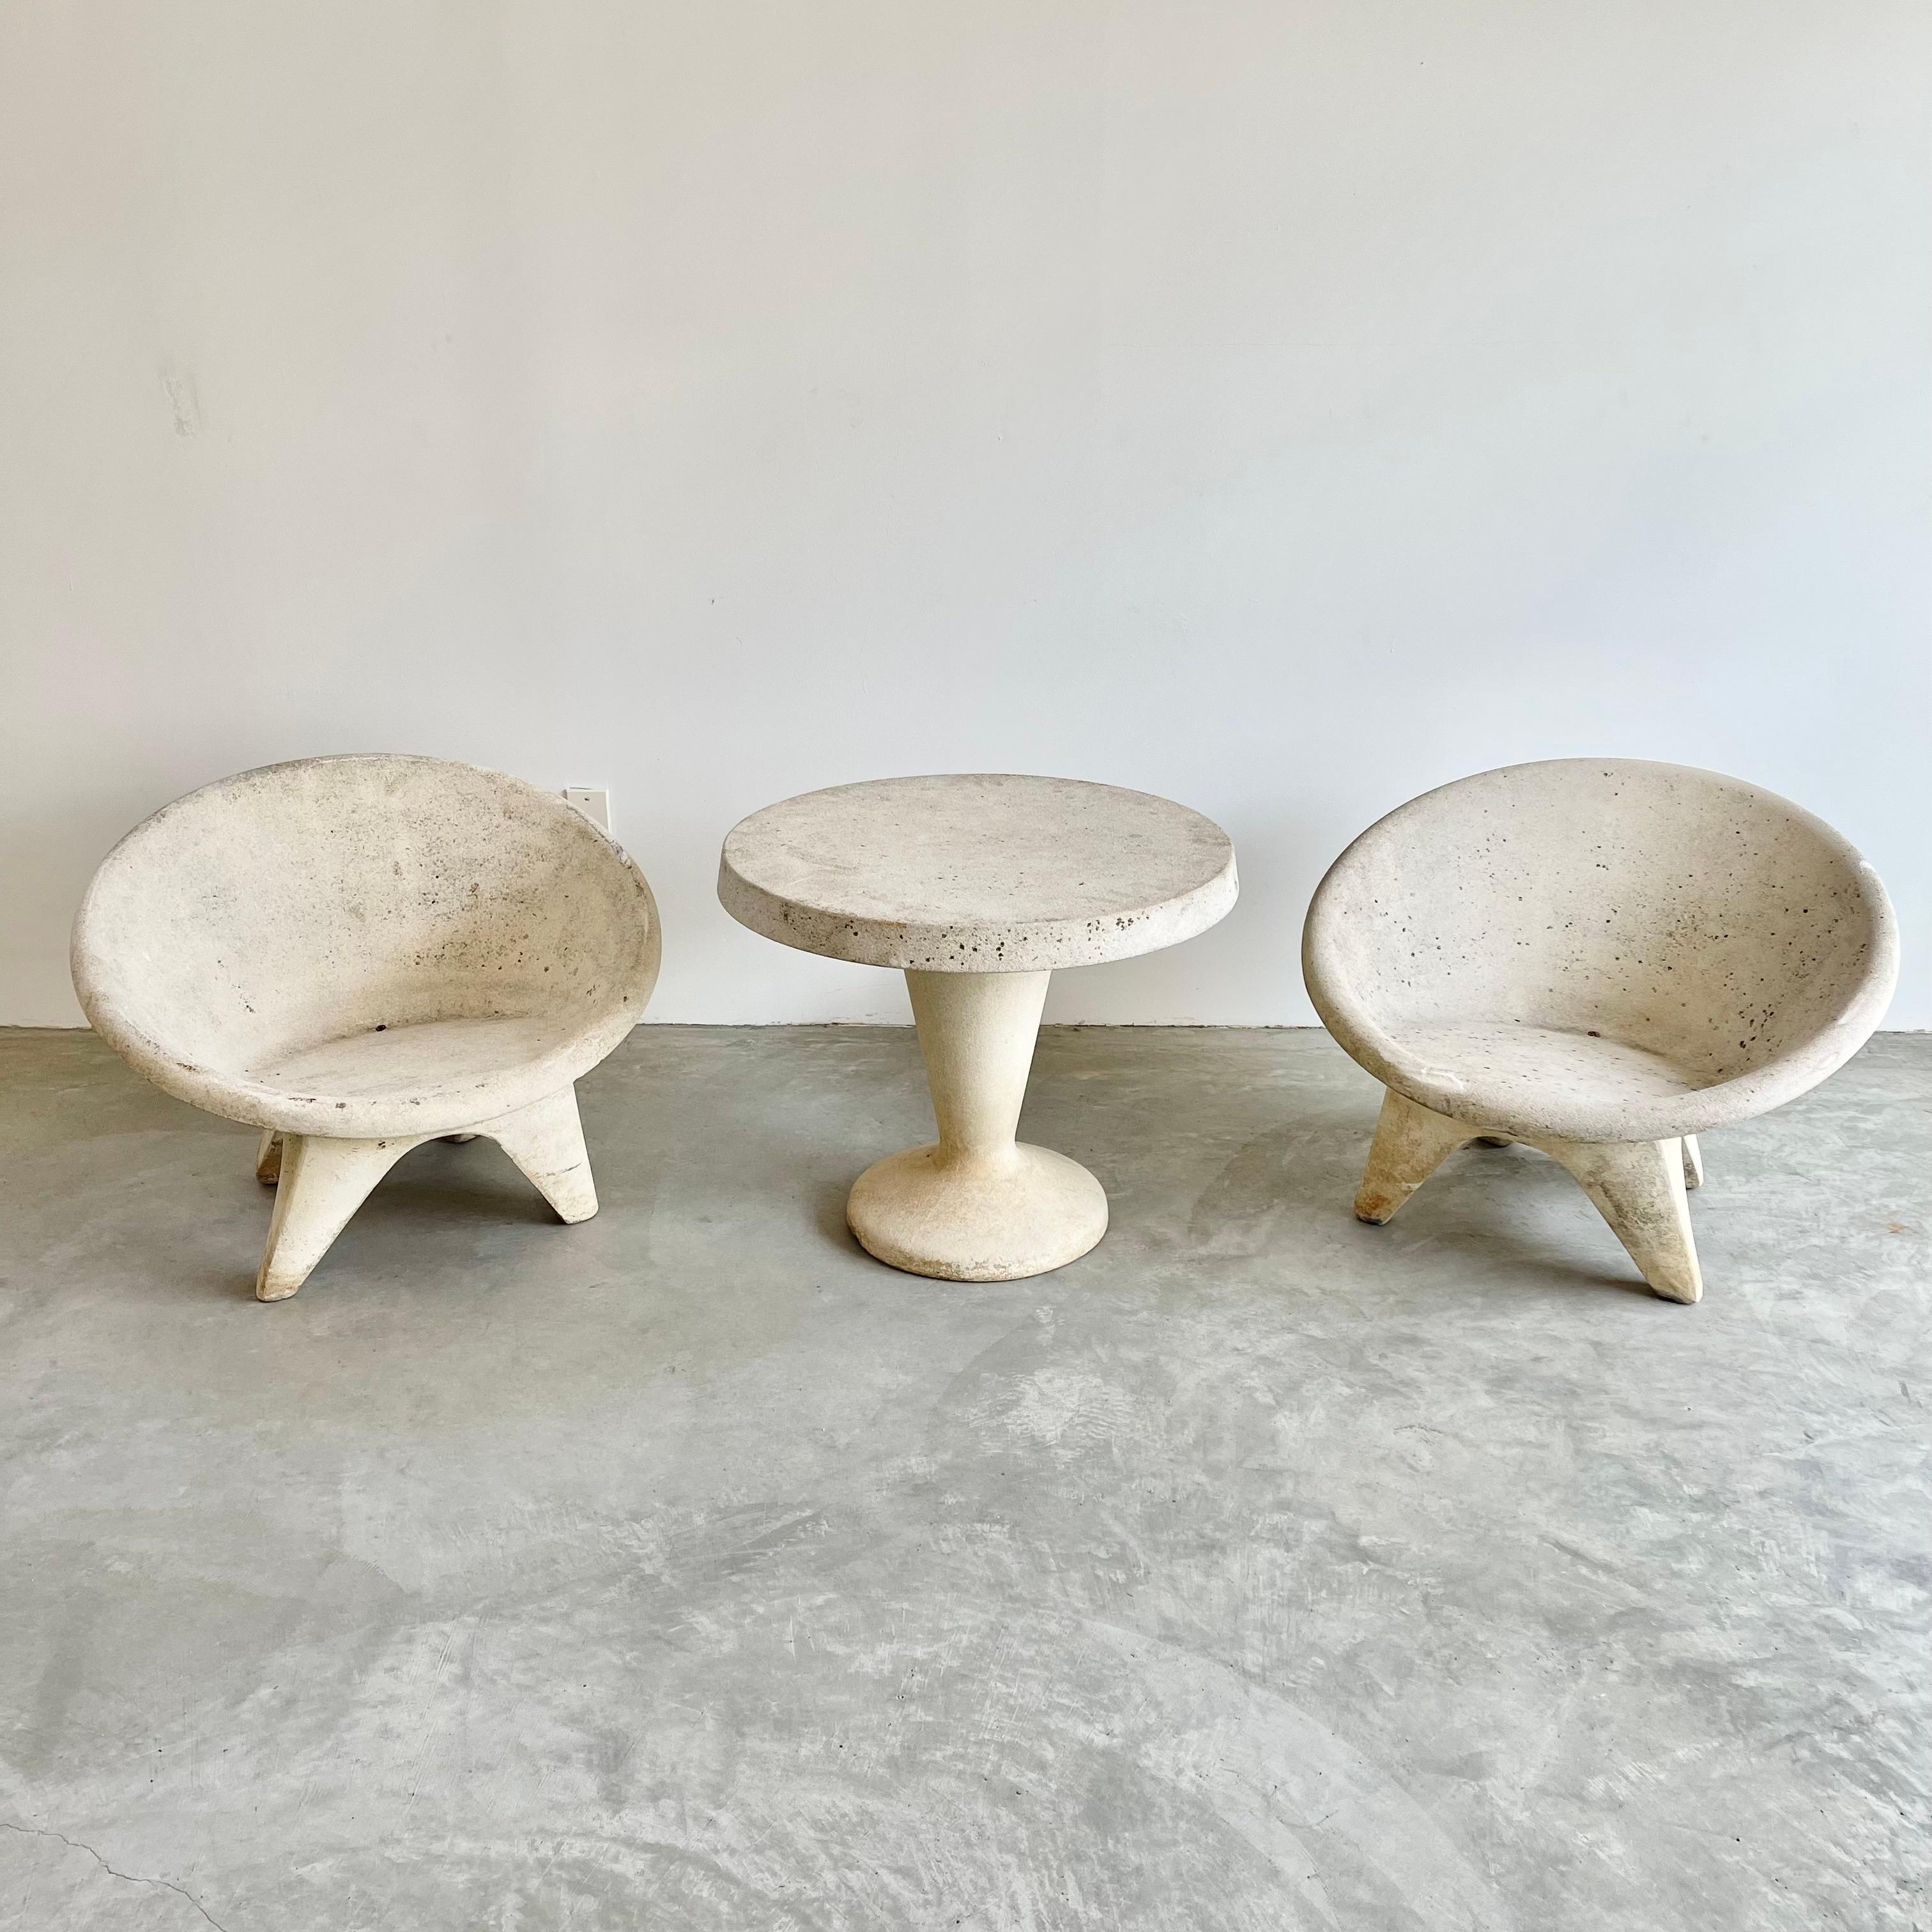 Hand-Crafted Sculptural Concrete Chairs and Table, 1960s Switzerland